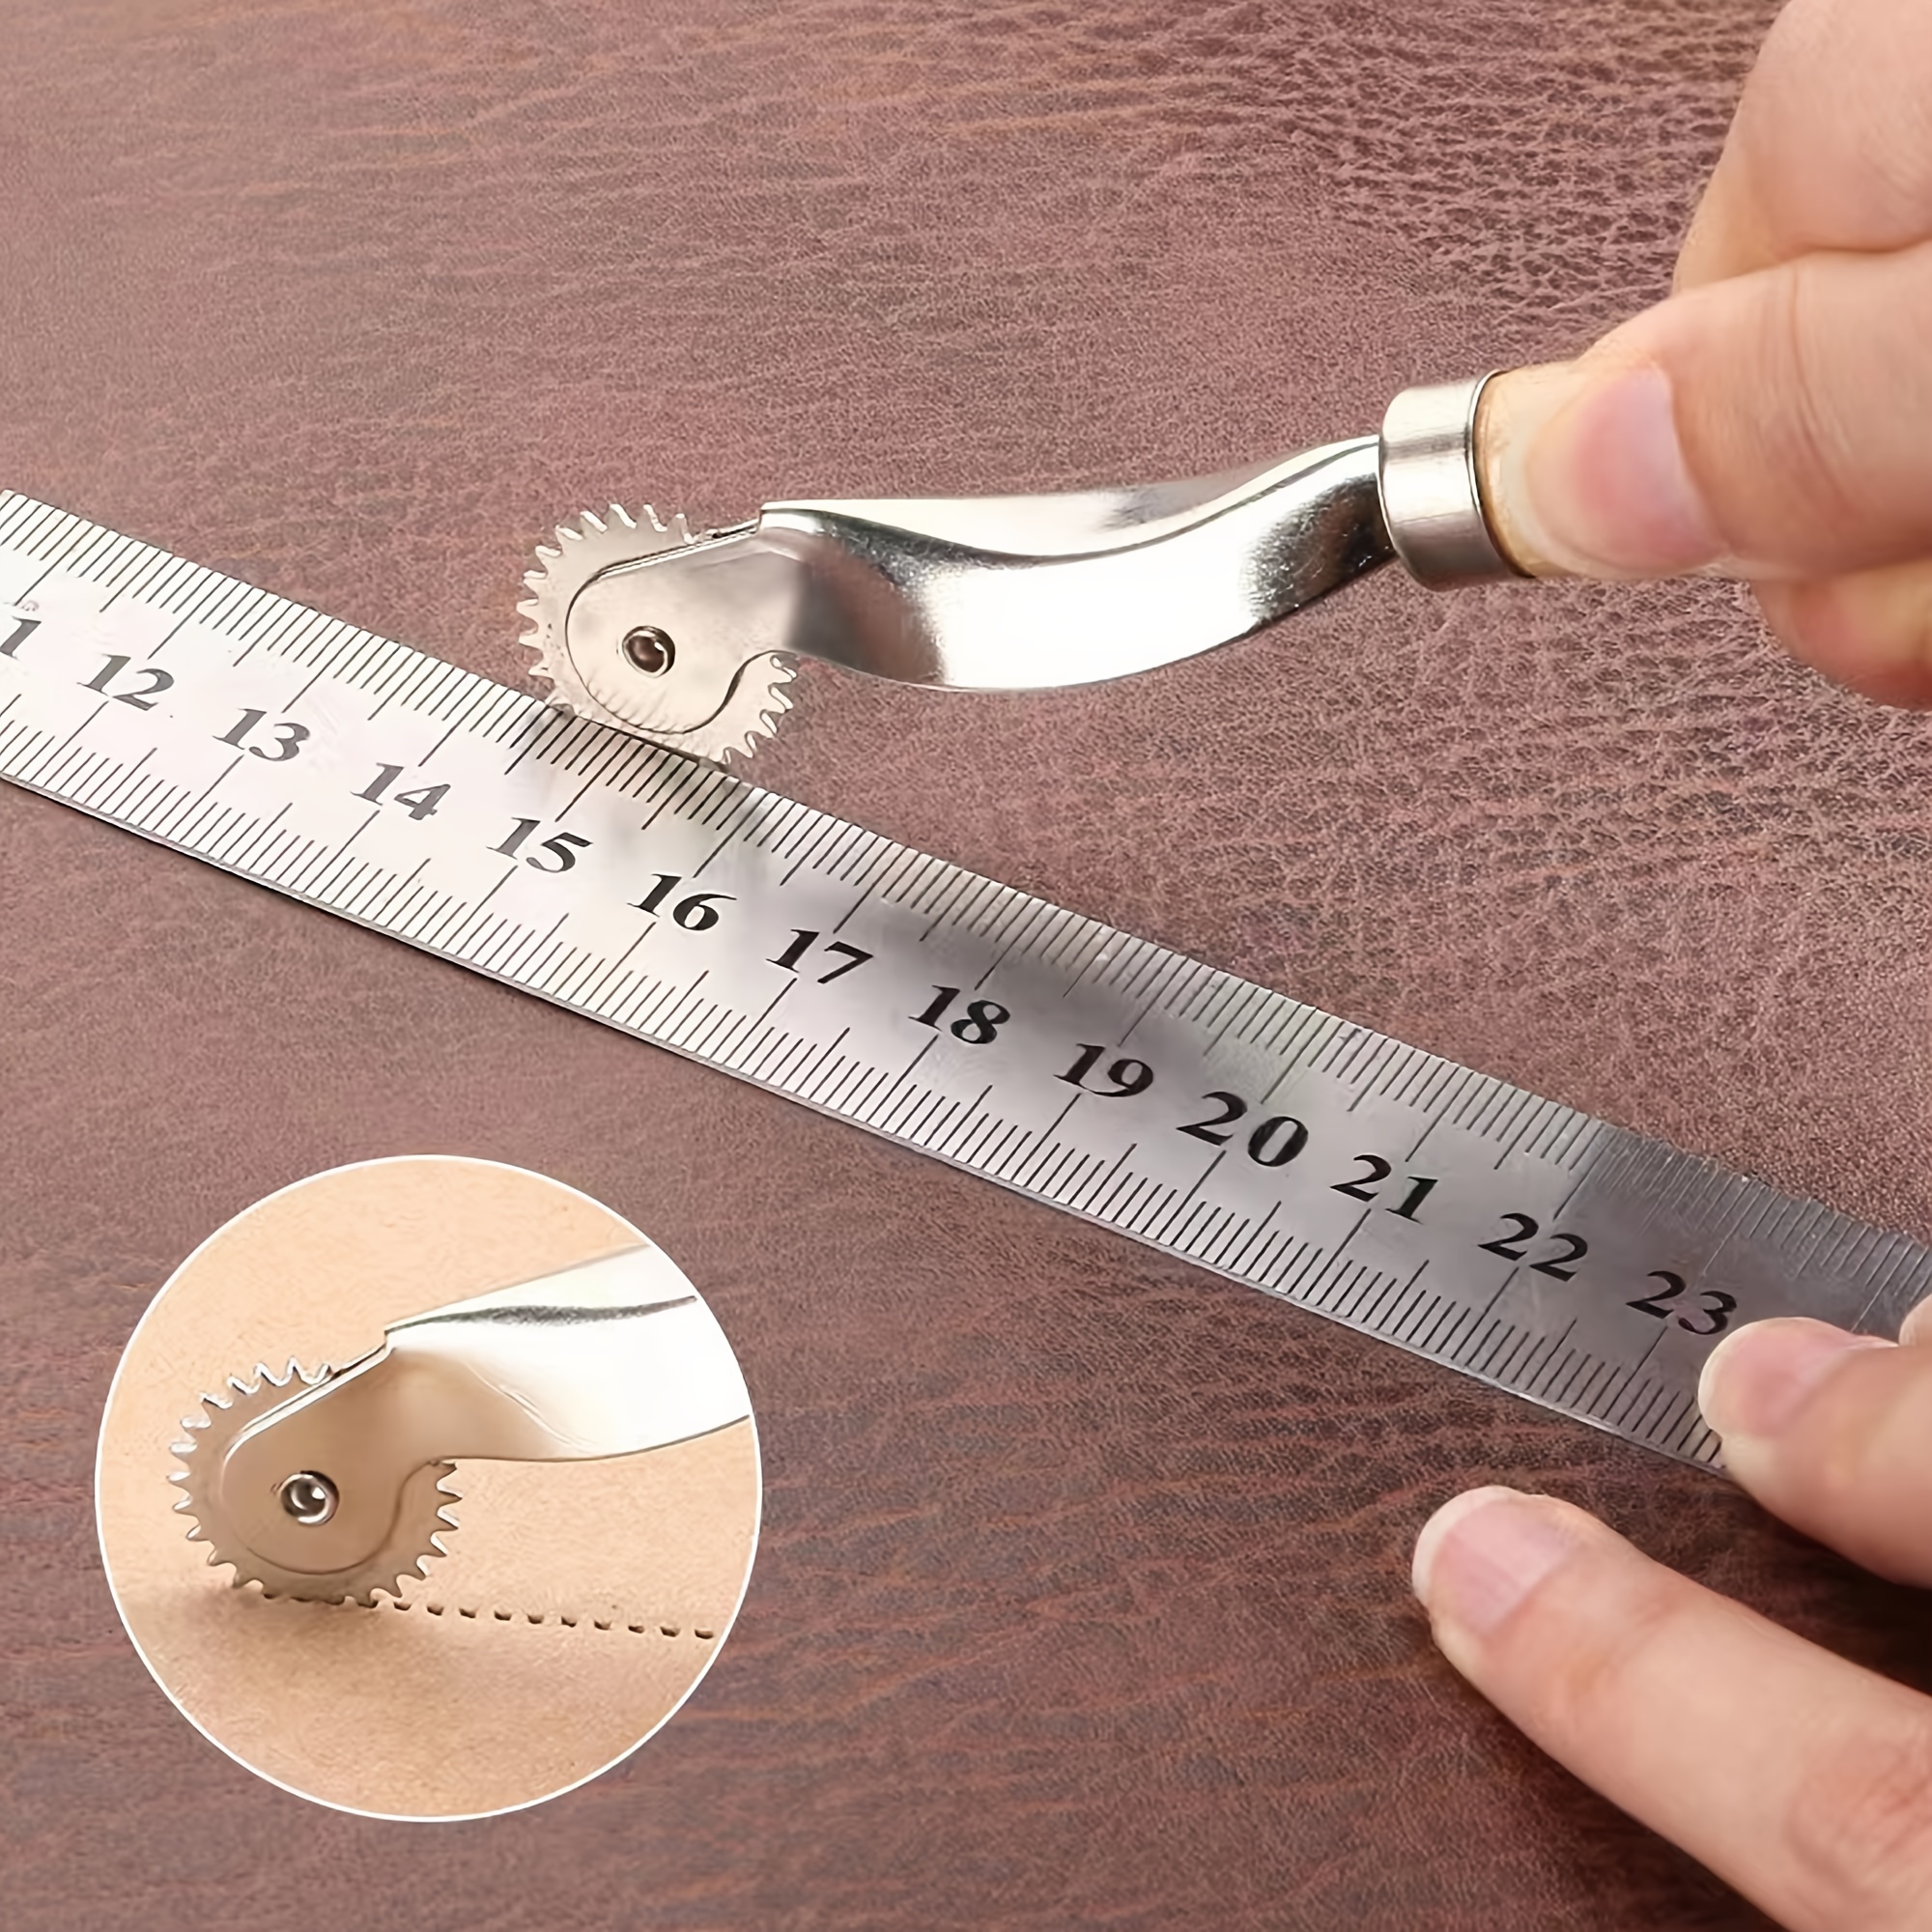 Sewing tracing wheel for sewing patterns Wood and stainless steel Pounce  wheel Perforation cutter Overstitch Wheel paper Perforator Tracing wheel  sewing Rotary perforator Pounce wheels by SEWTCO Tracing Wheel 1 Tra